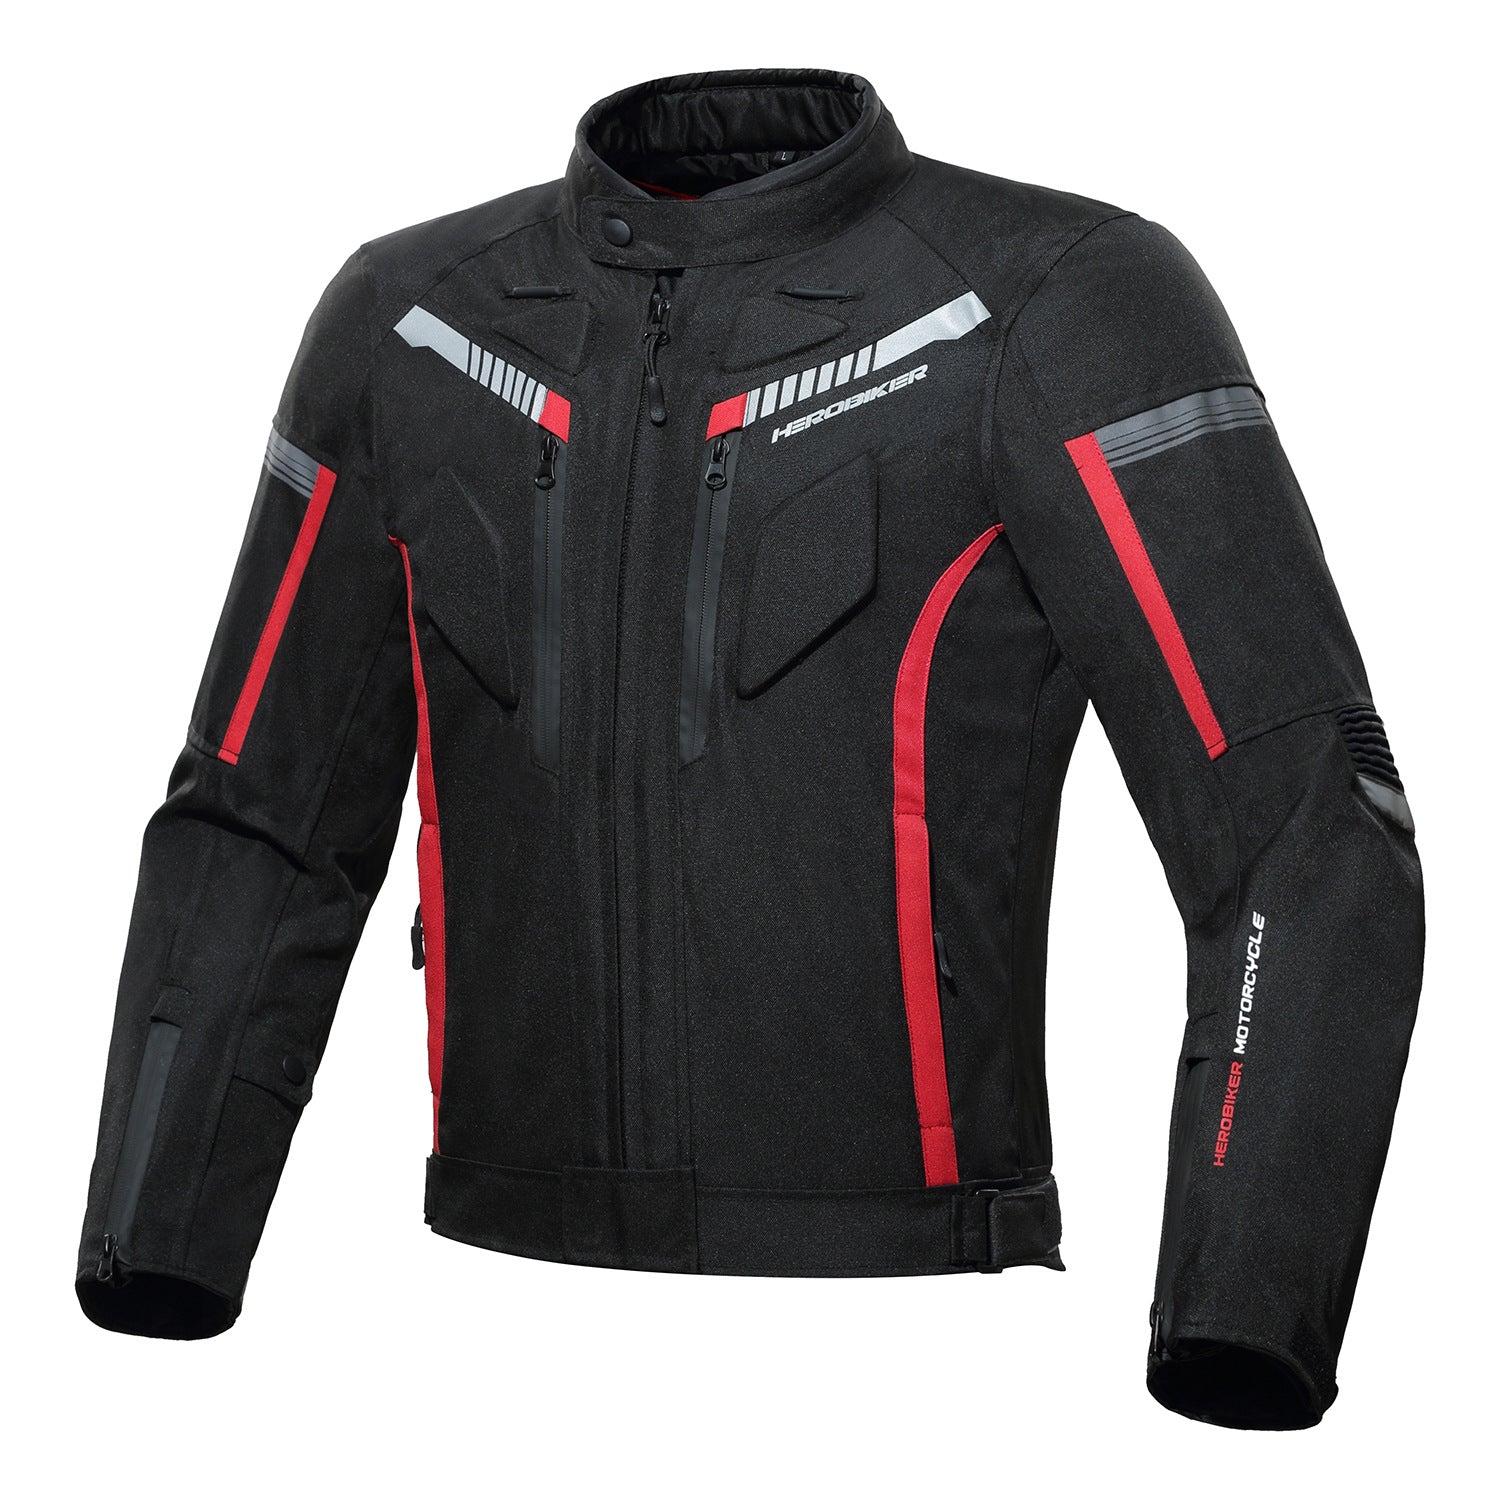 Motorcycle riding clothes